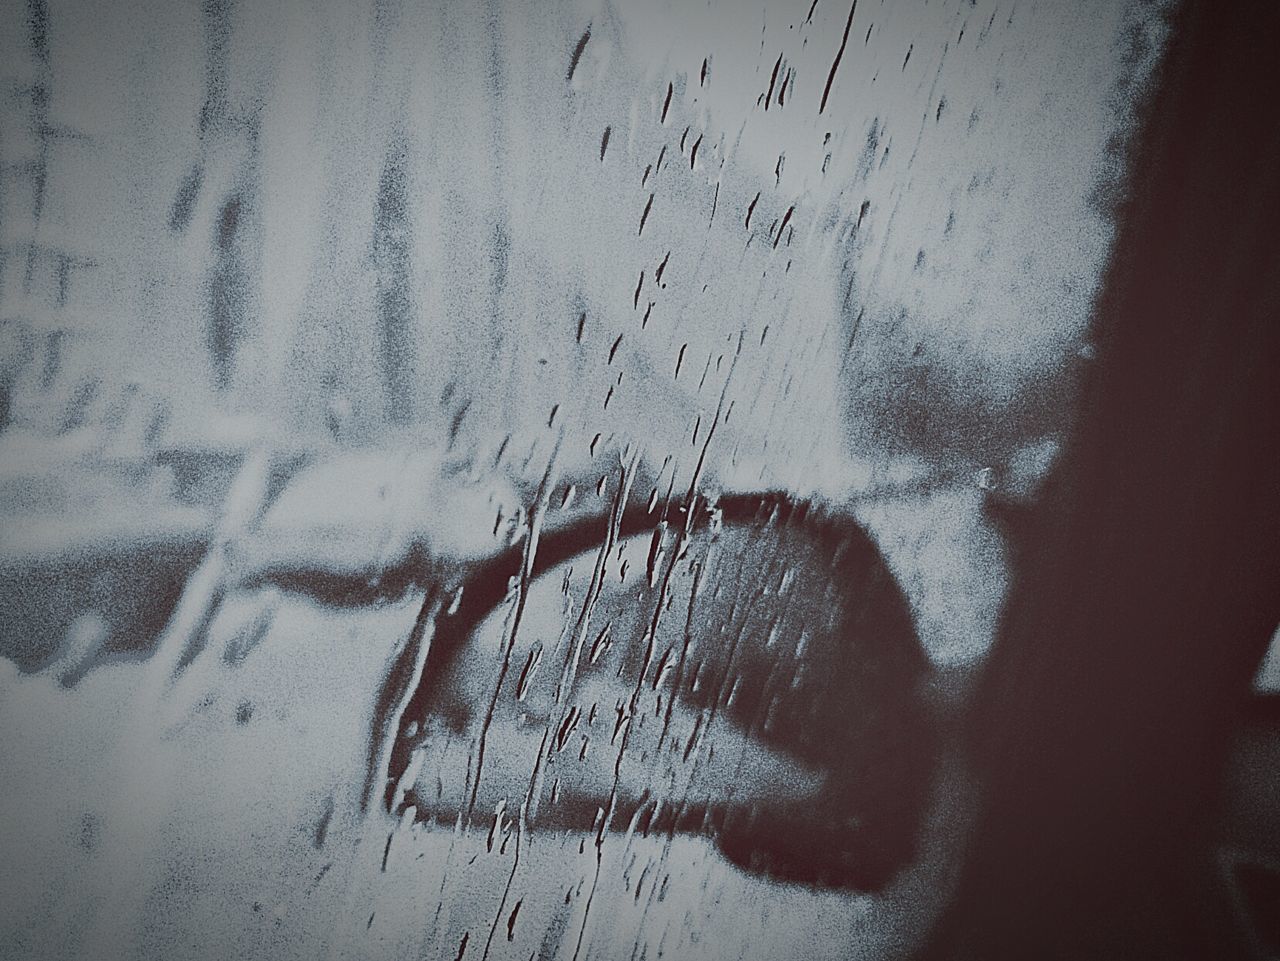 CLOSE-UP OF HUMAN HAND AGAINST WINDOW